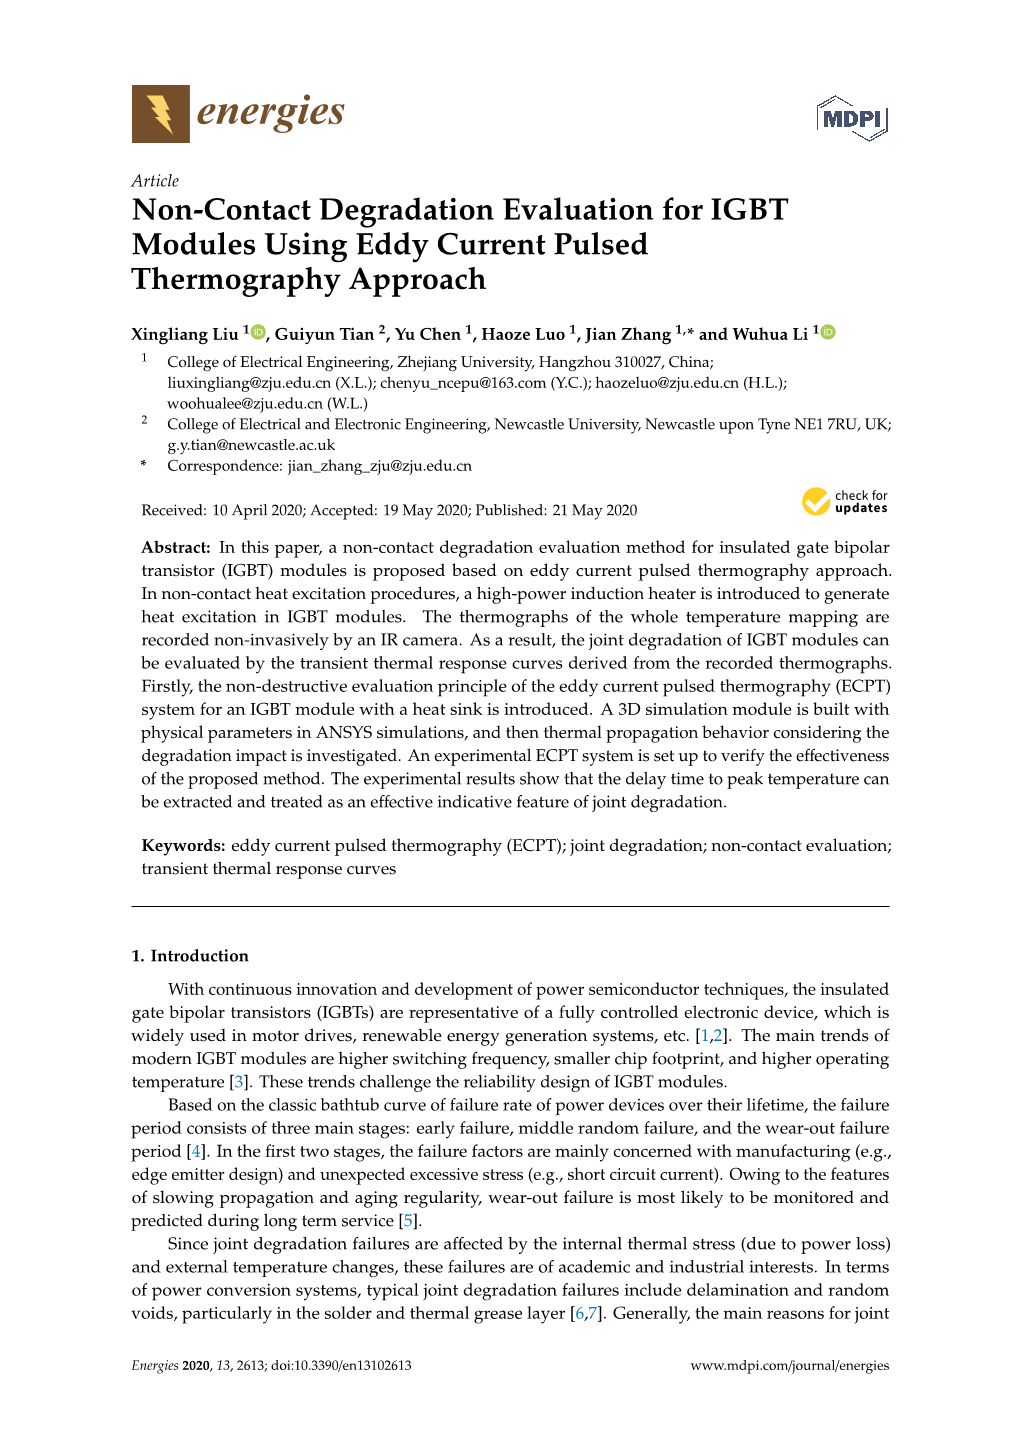 Non-Contact Degradation Evaluation for IGBT Modules Using Eddy Current Pulsed Thermography Approach